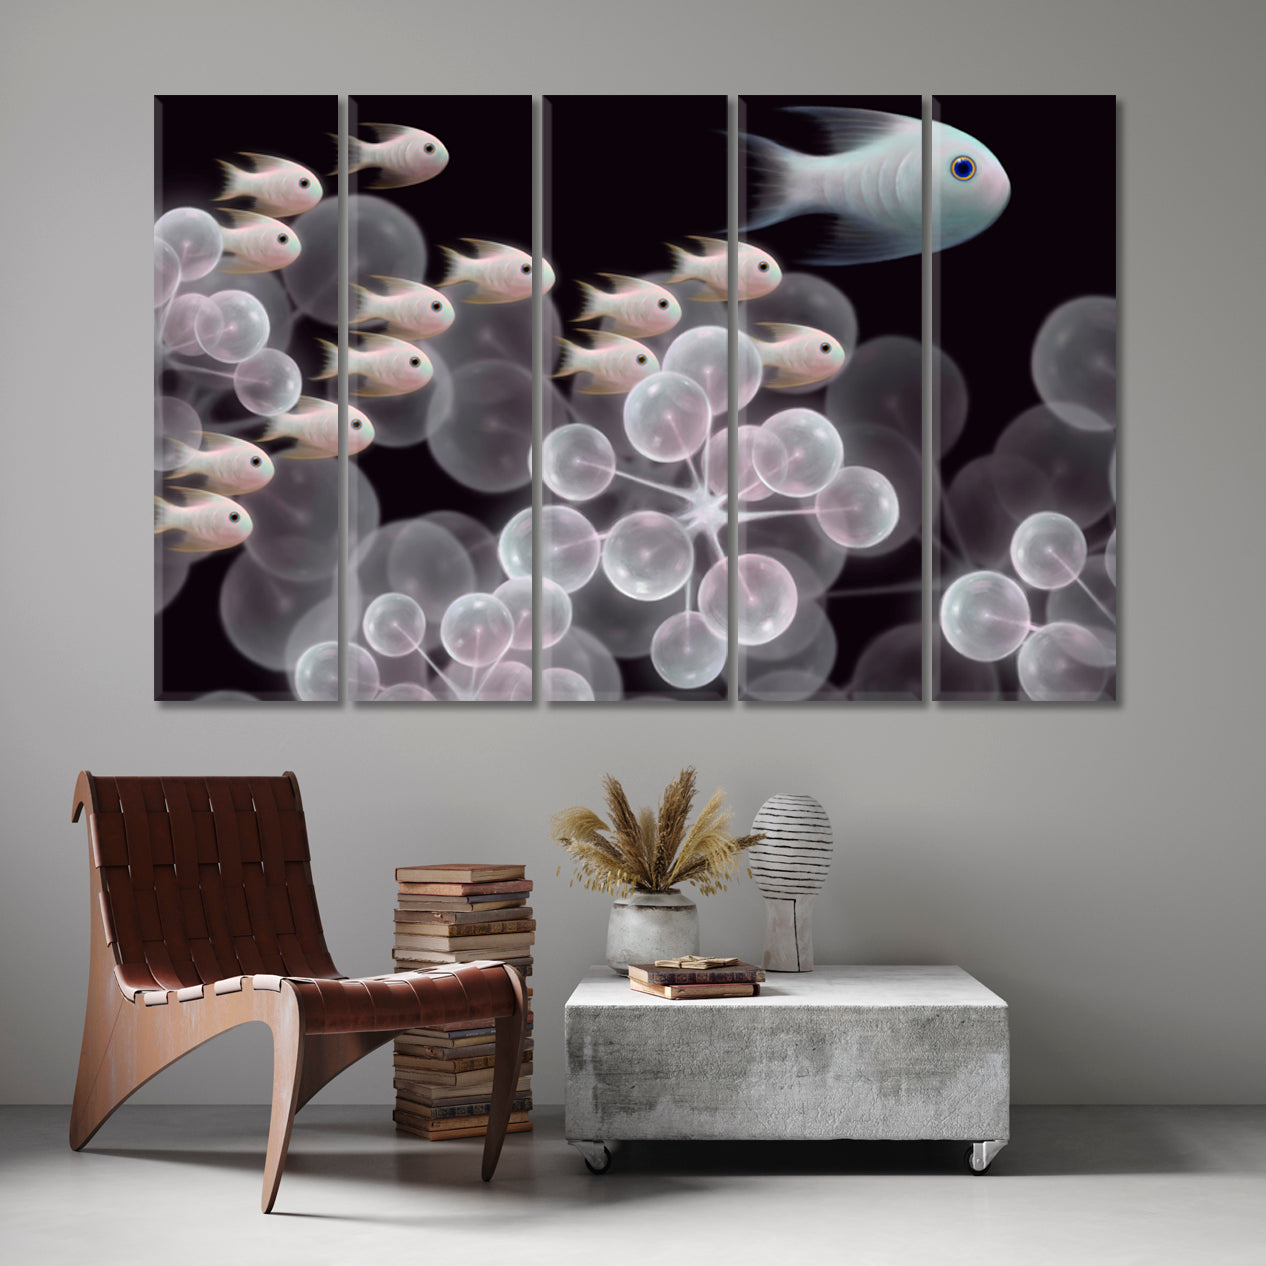 INNER UNIVERSE Live Organism Molecules And Schooling Fish Abstract Fantasy Nautical, Sea Life Pattern Art Artesty 5 panels 36" x 24" 